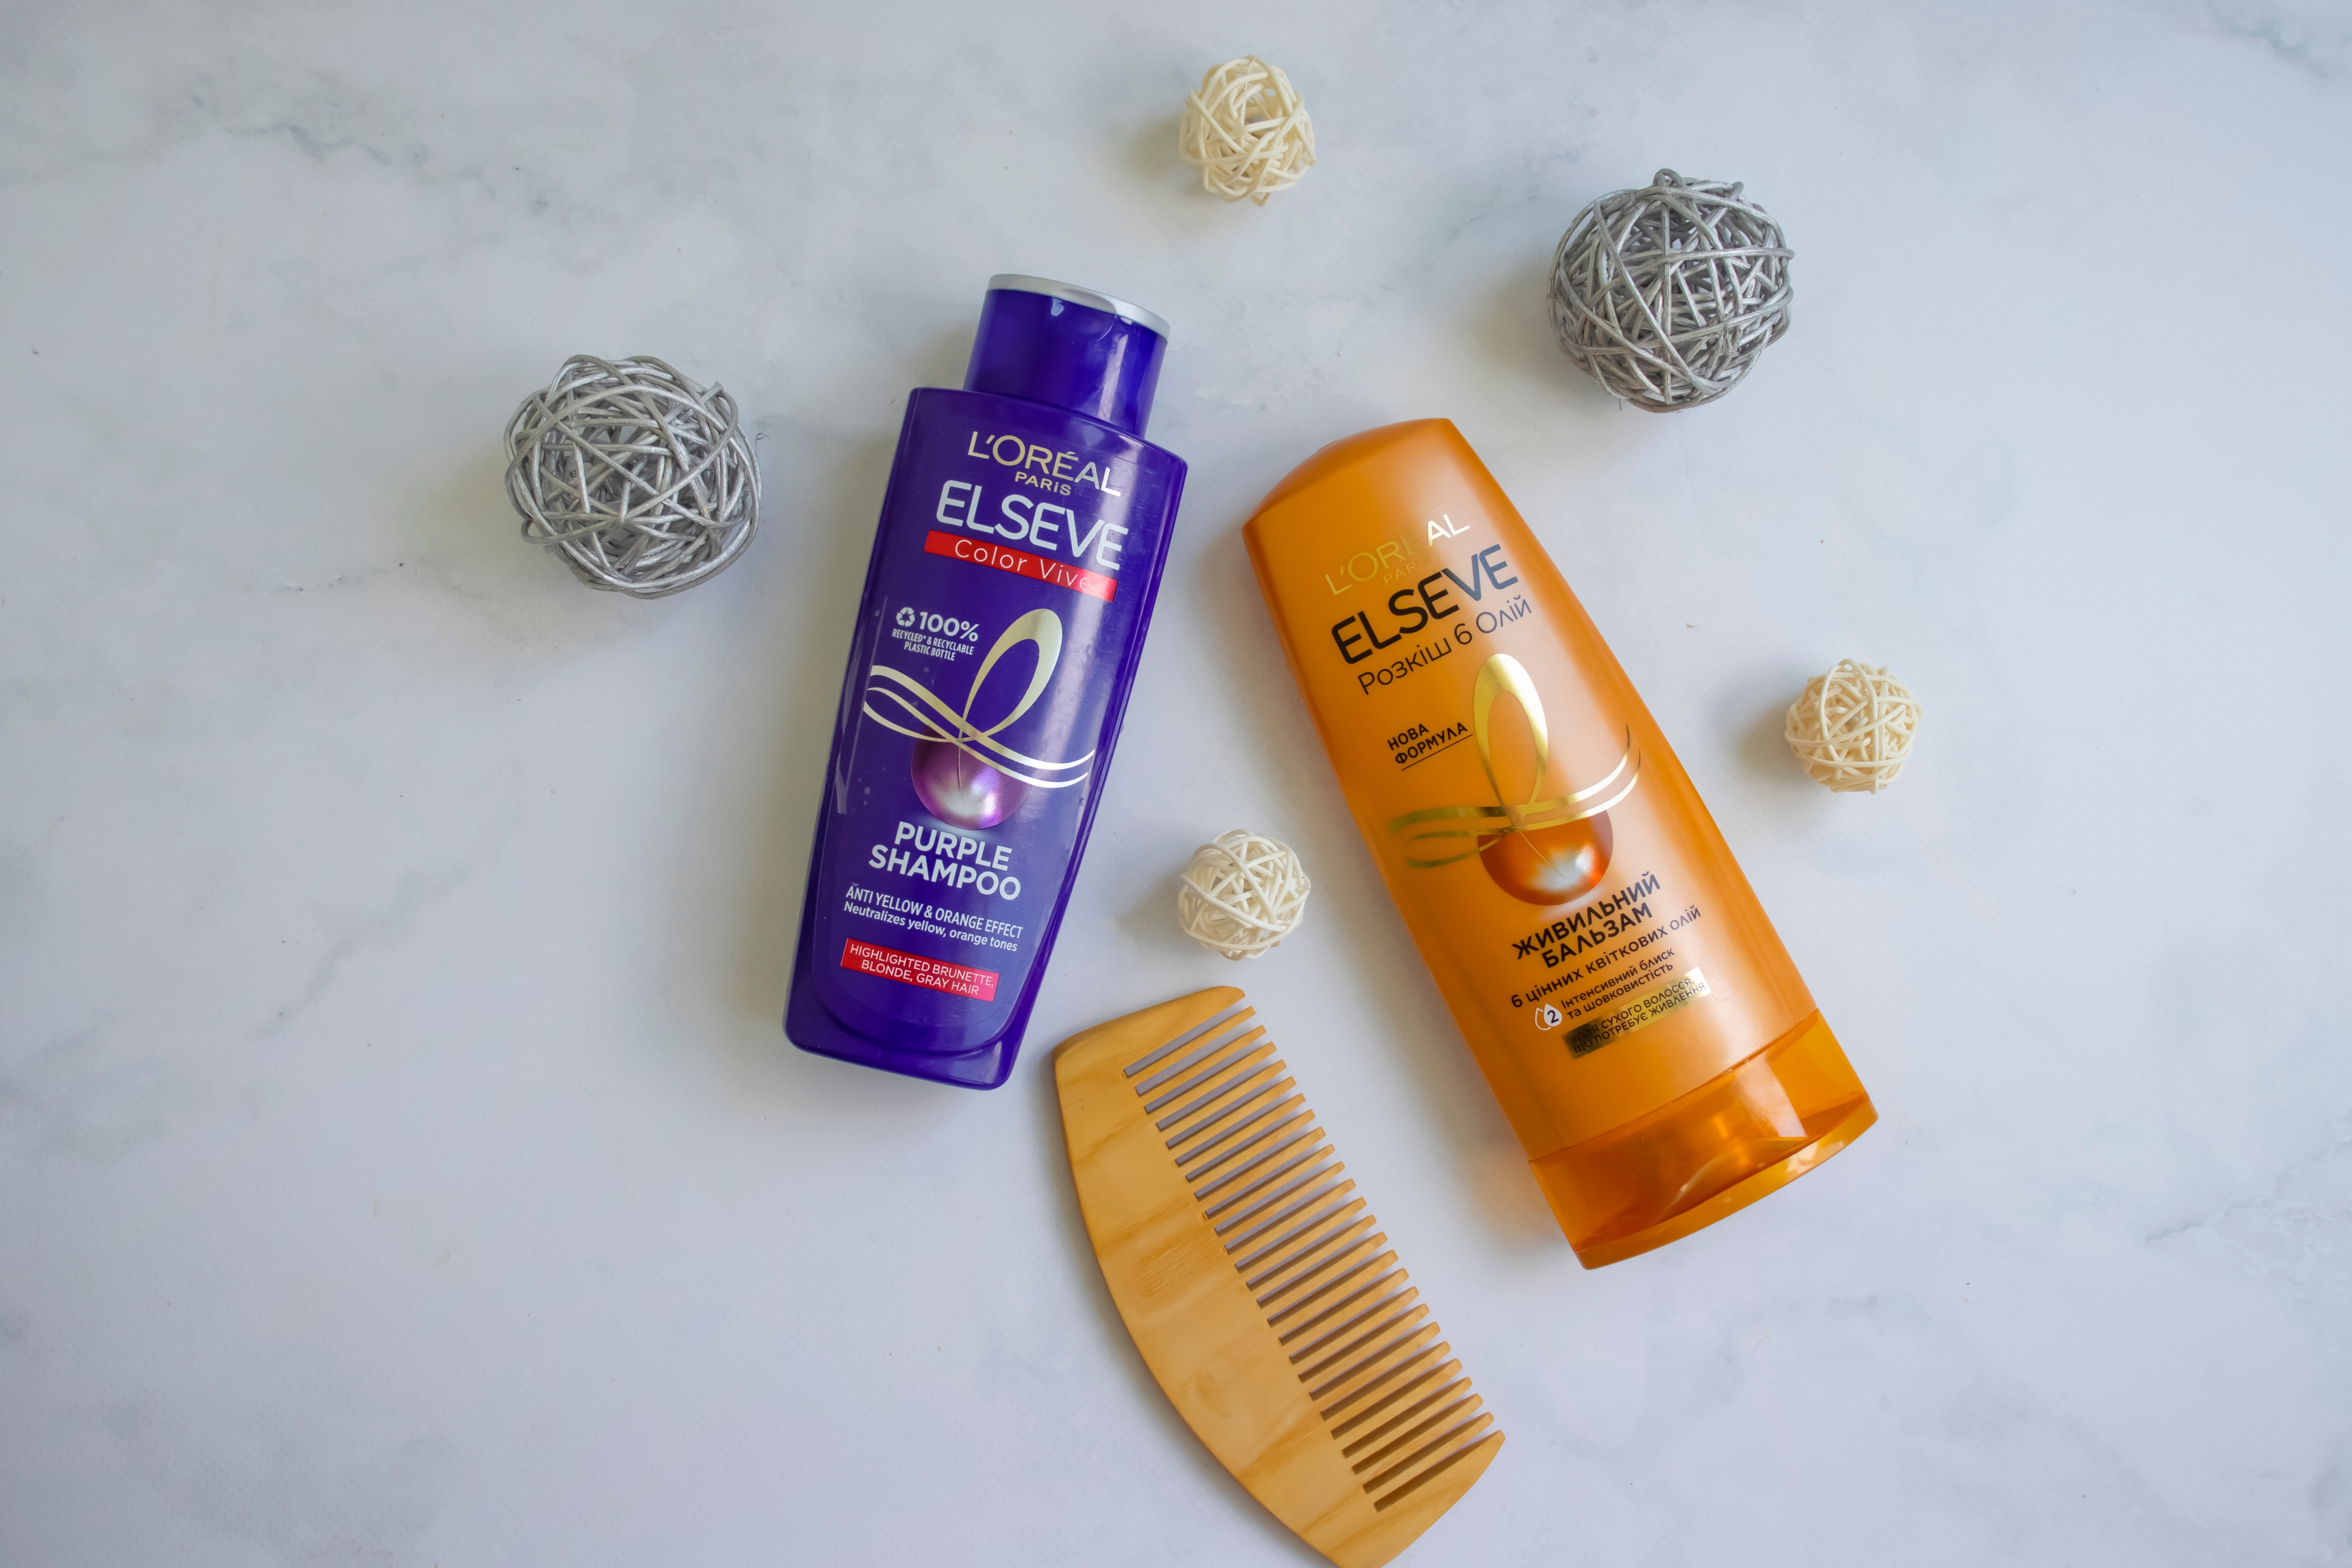 L'Oréal Shampoo – Why It's Different from Other Shampoo